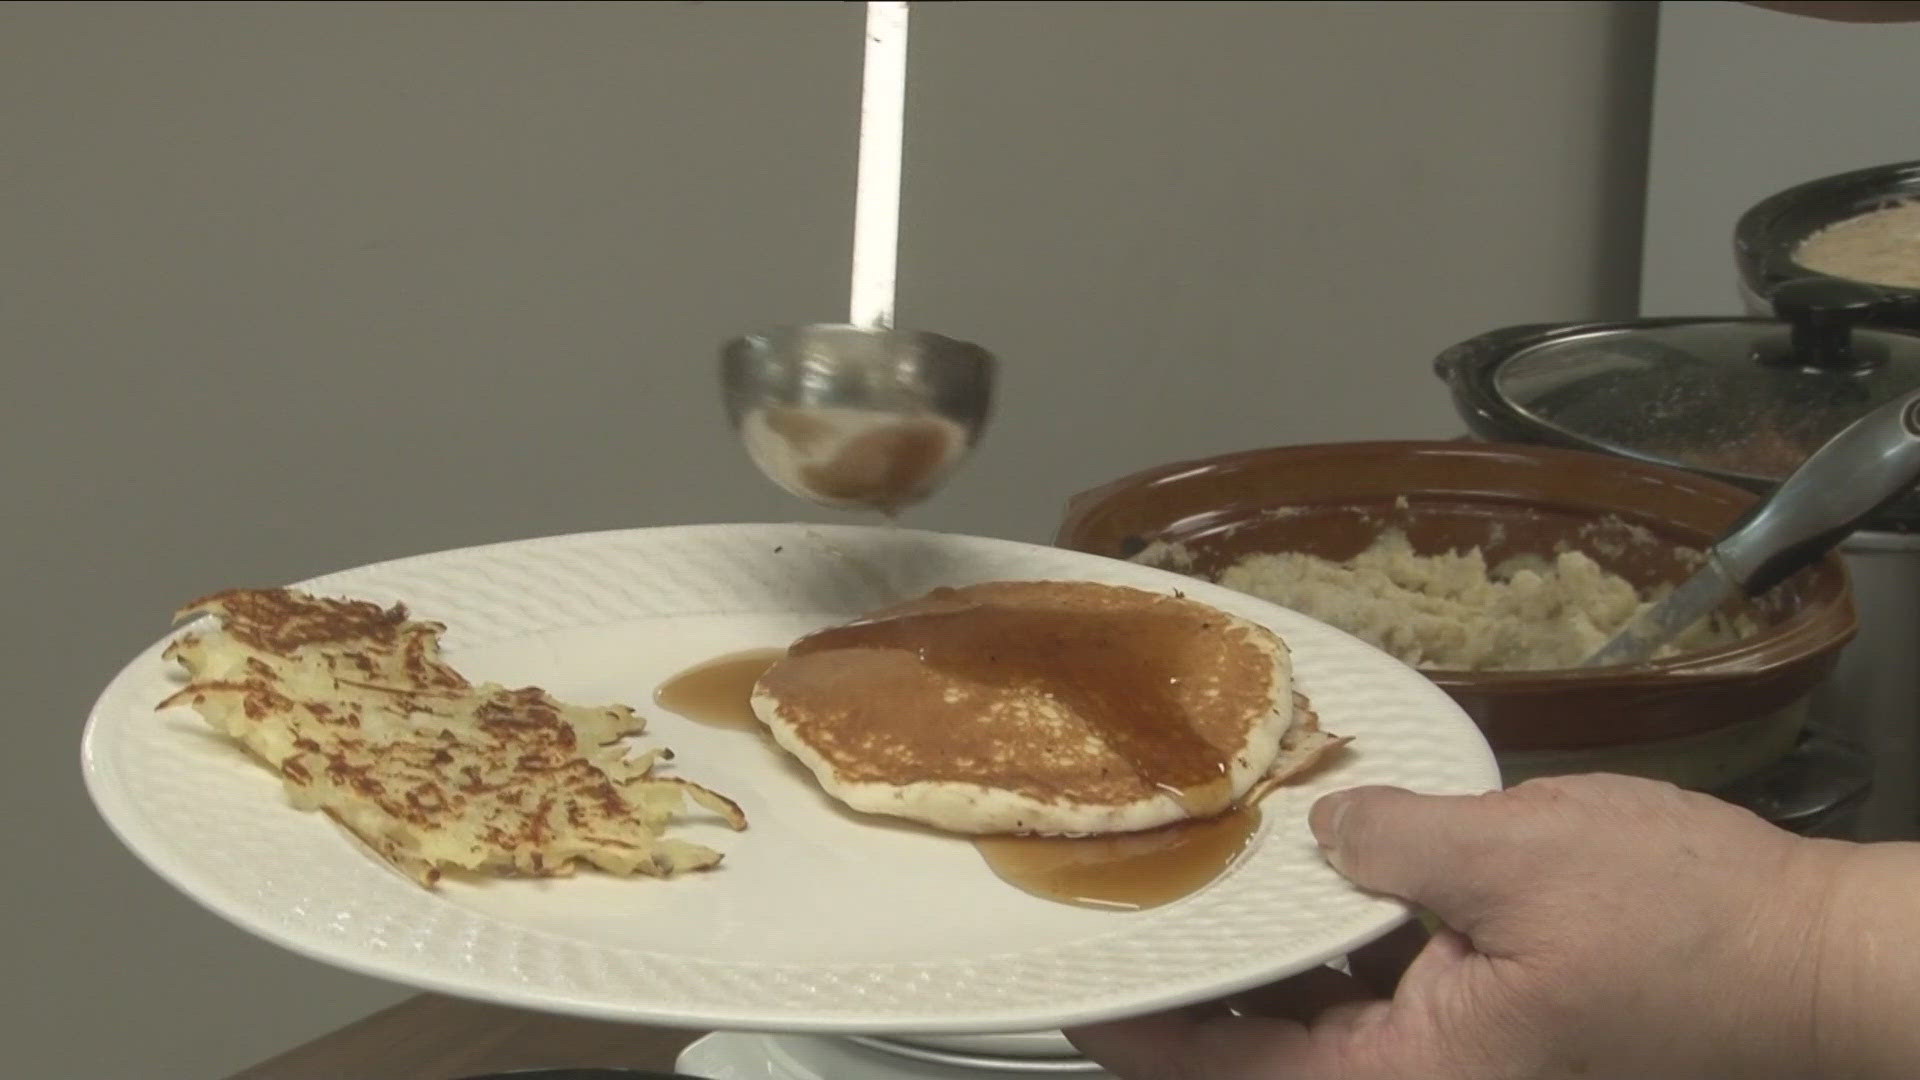 The West Seneca Masonic Lodge hosted its annual pancake breakfast which raises funds that go to providing help for young people dealing with substance abuse.